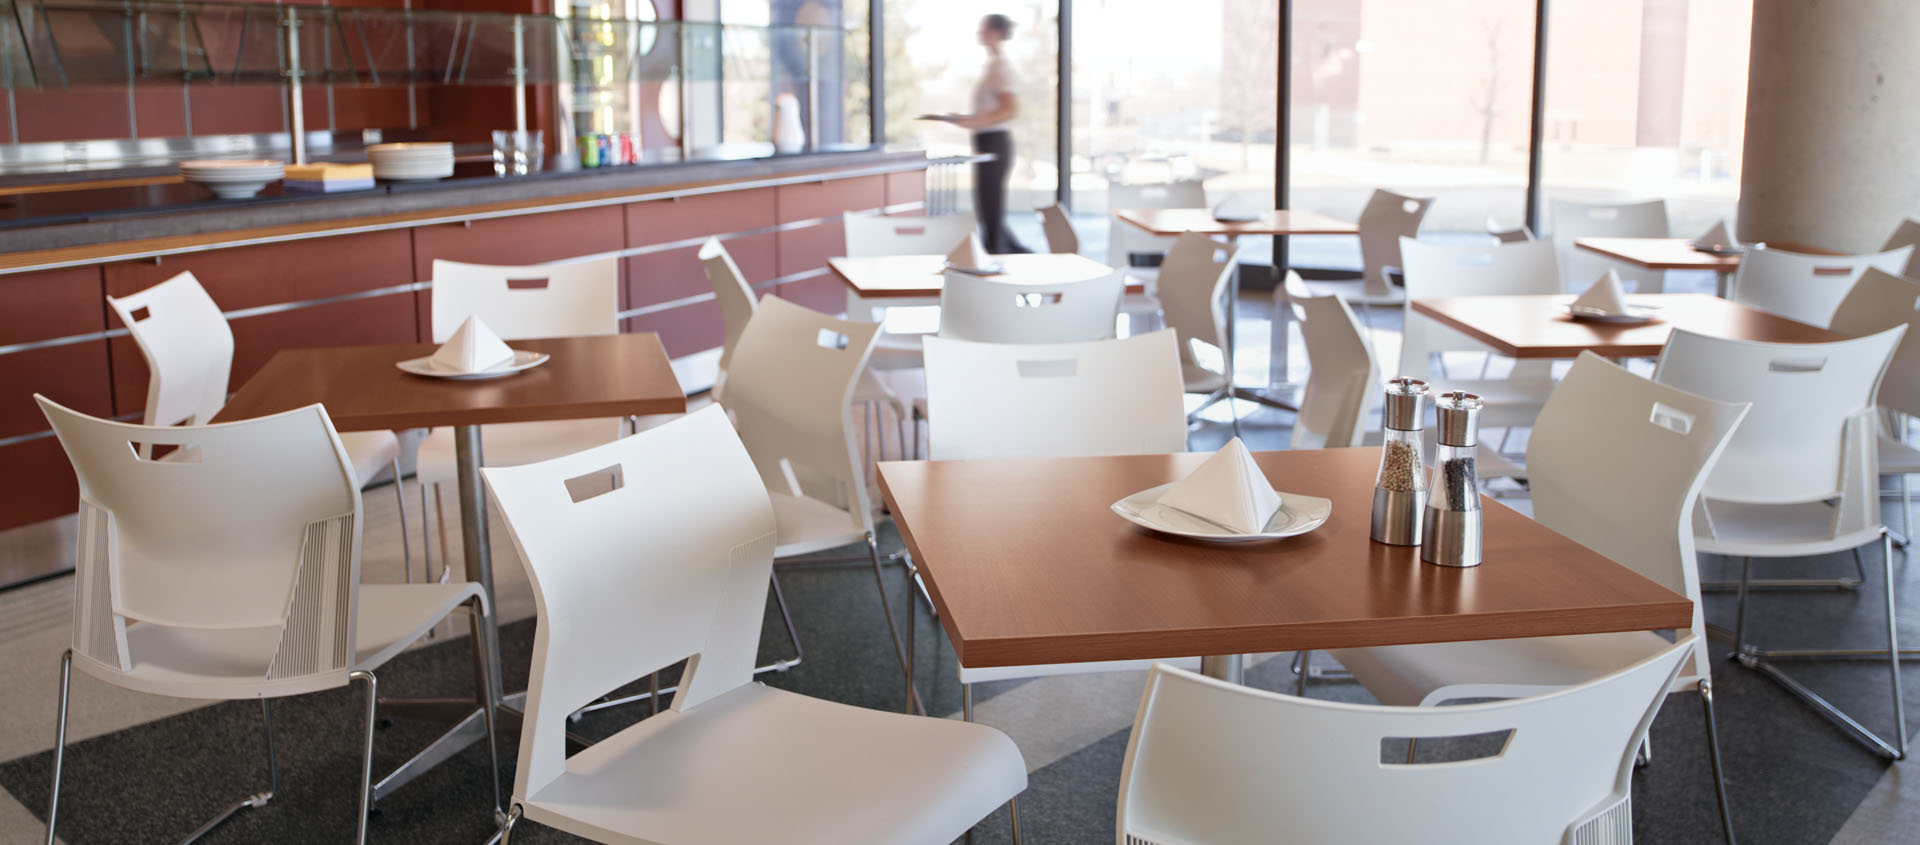 Image of cafeteria tables set in preparation for lunch